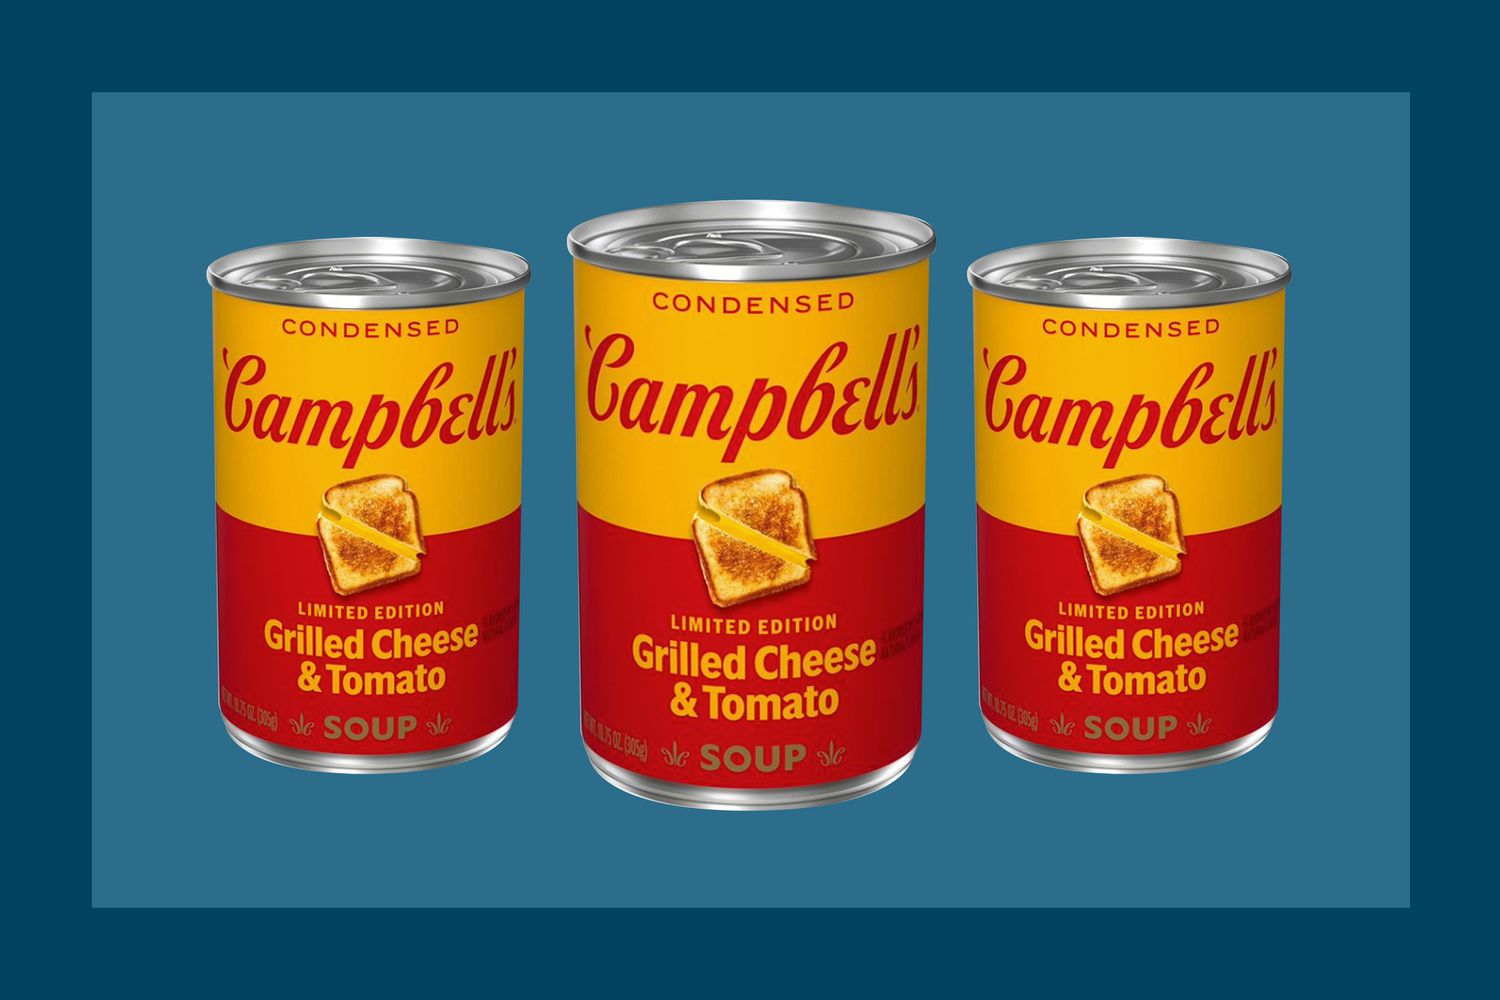 Campbells Released a Grilled Cheese and Tomato Soup [Video]